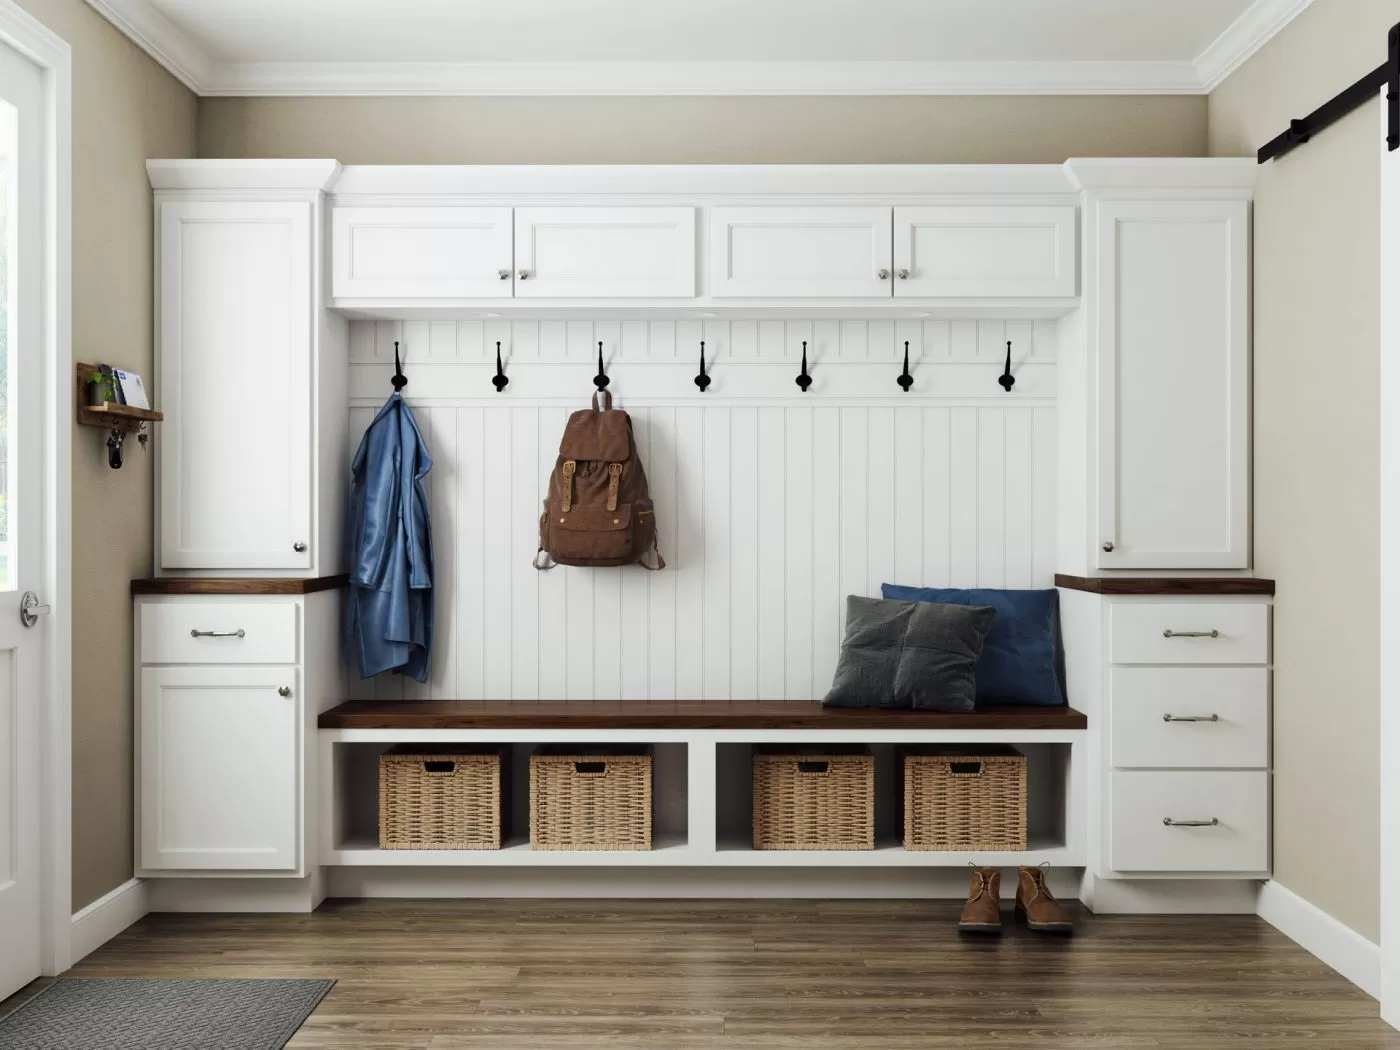 mudroom cabinets and laundry storage cabinets by Kountry Cabinets.